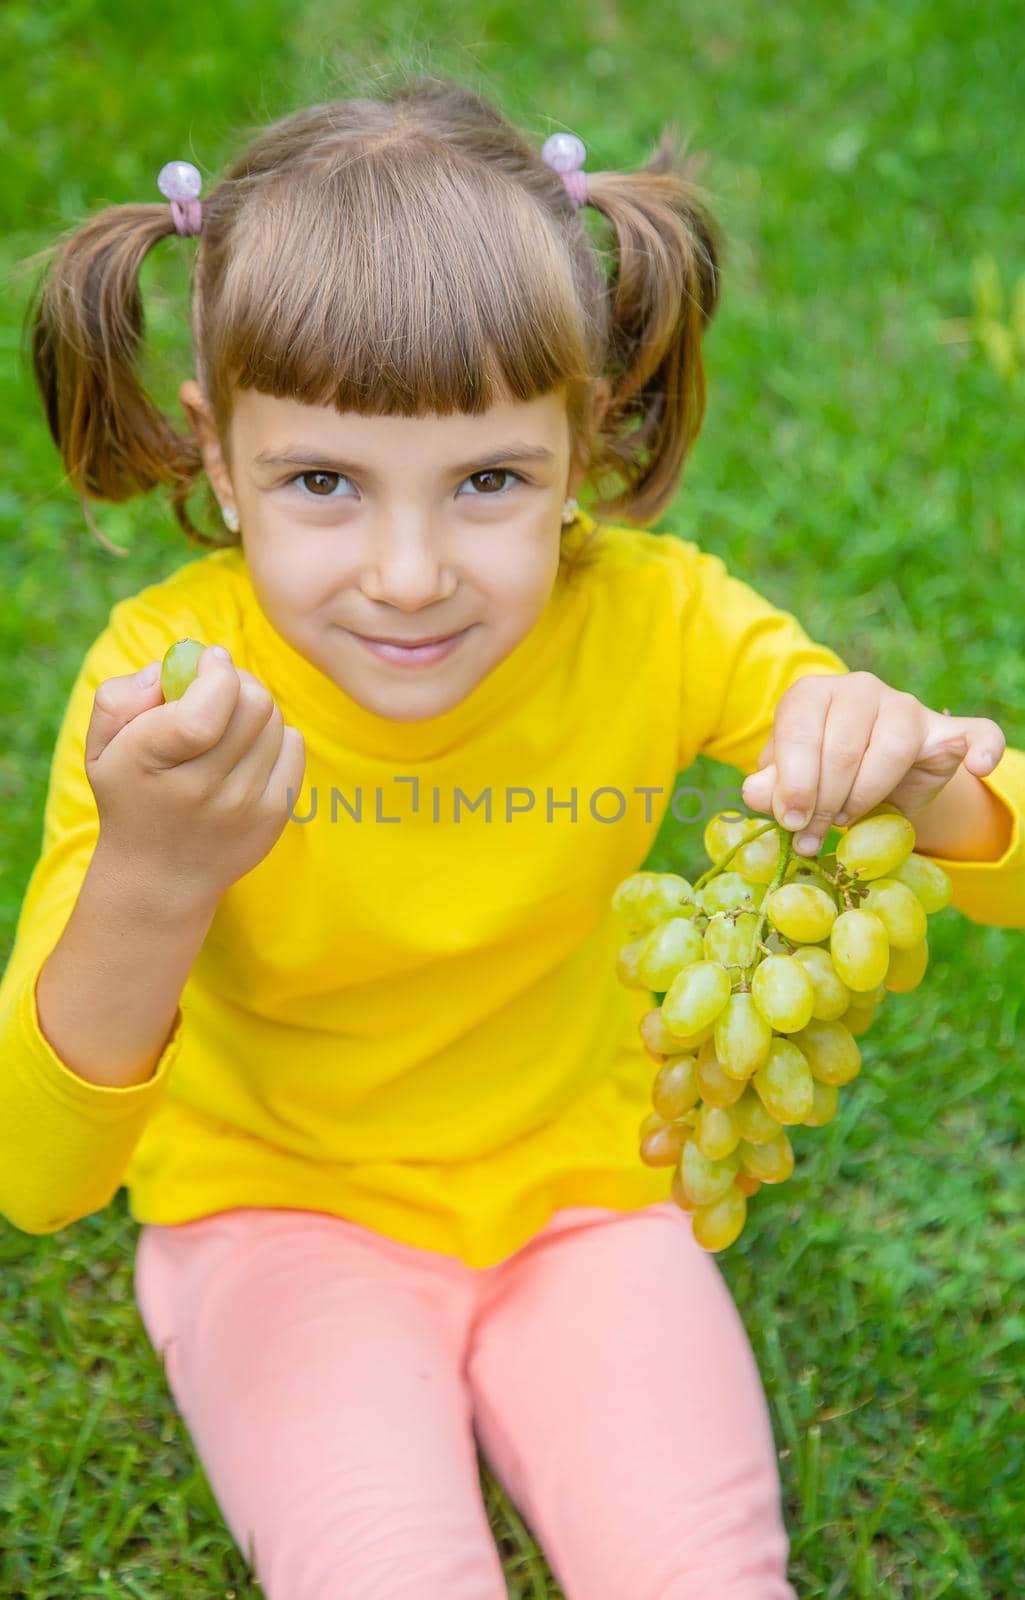 The child eats white grapes. Selective focus.